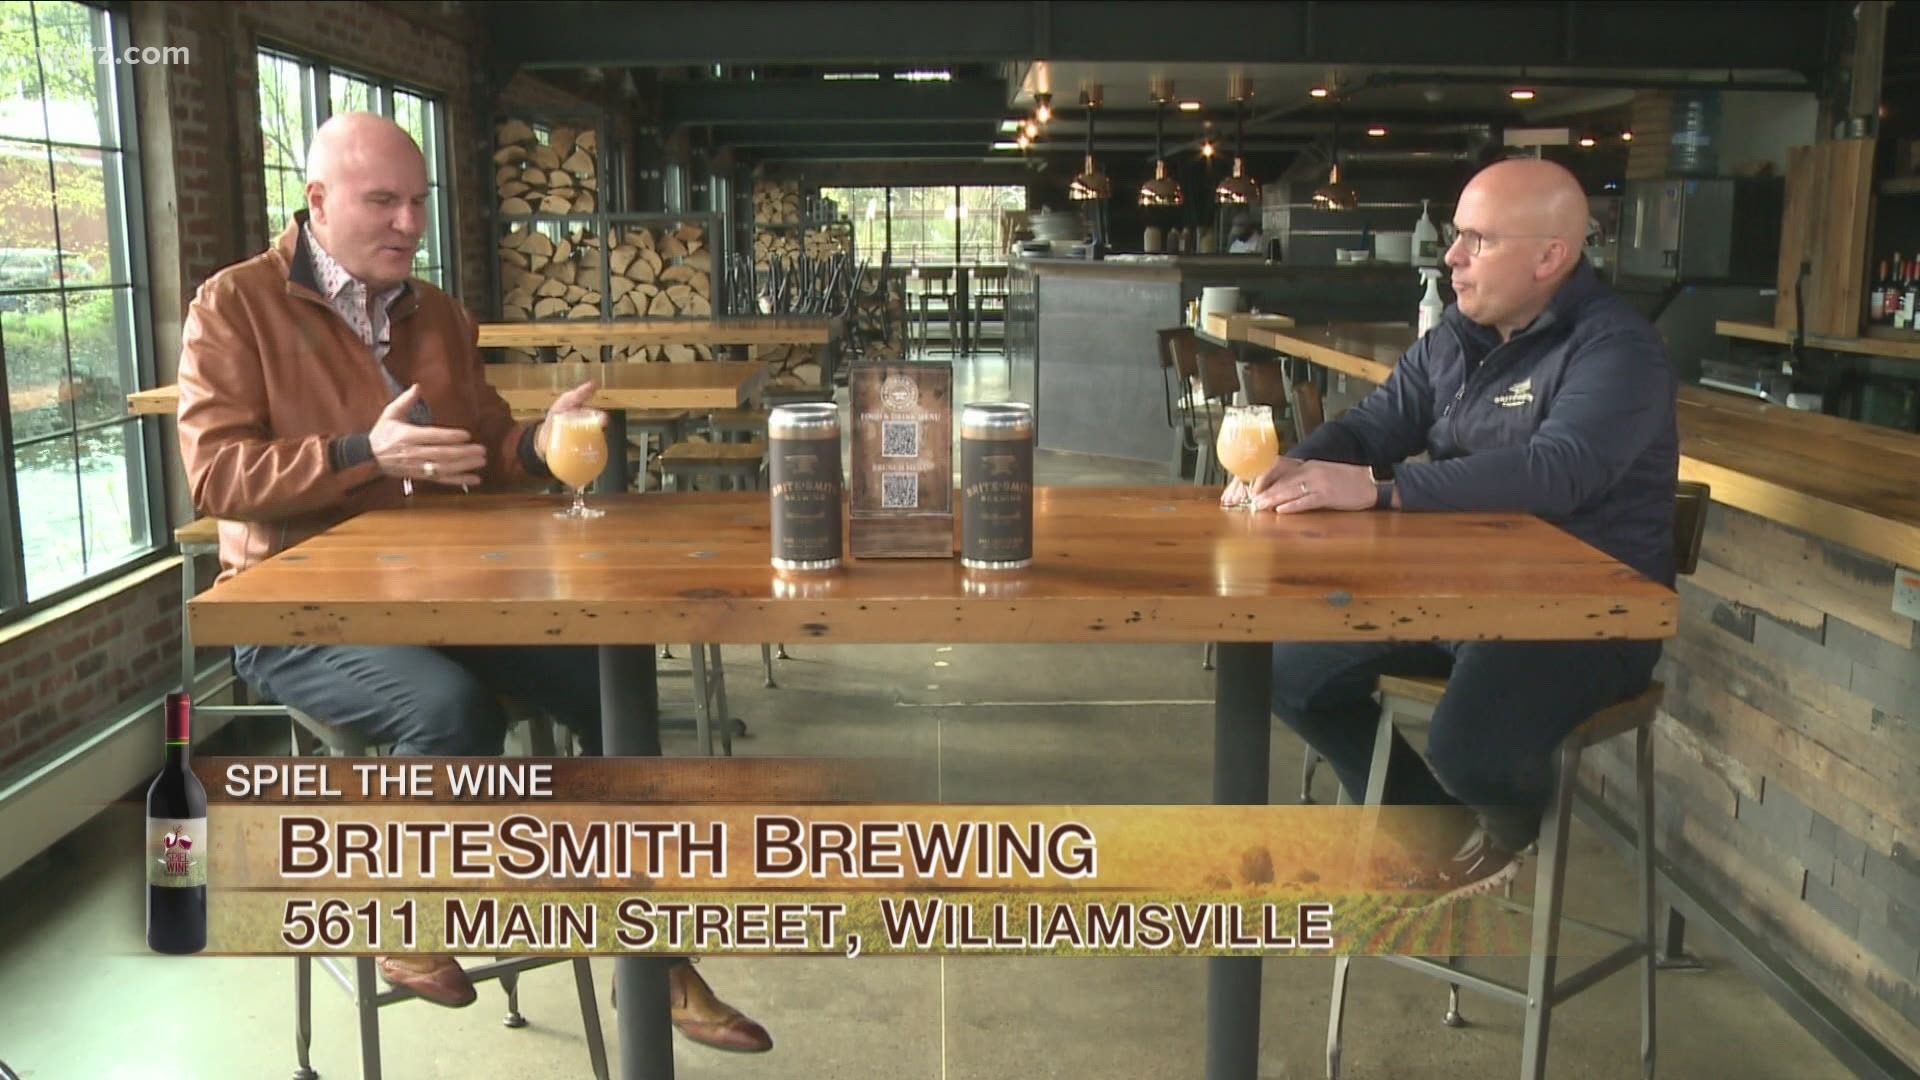 Spiel The Wine - April 24 - Segment 1 (THIS VIDEO IS SPONSORED BY BRITESMITH BREWING )